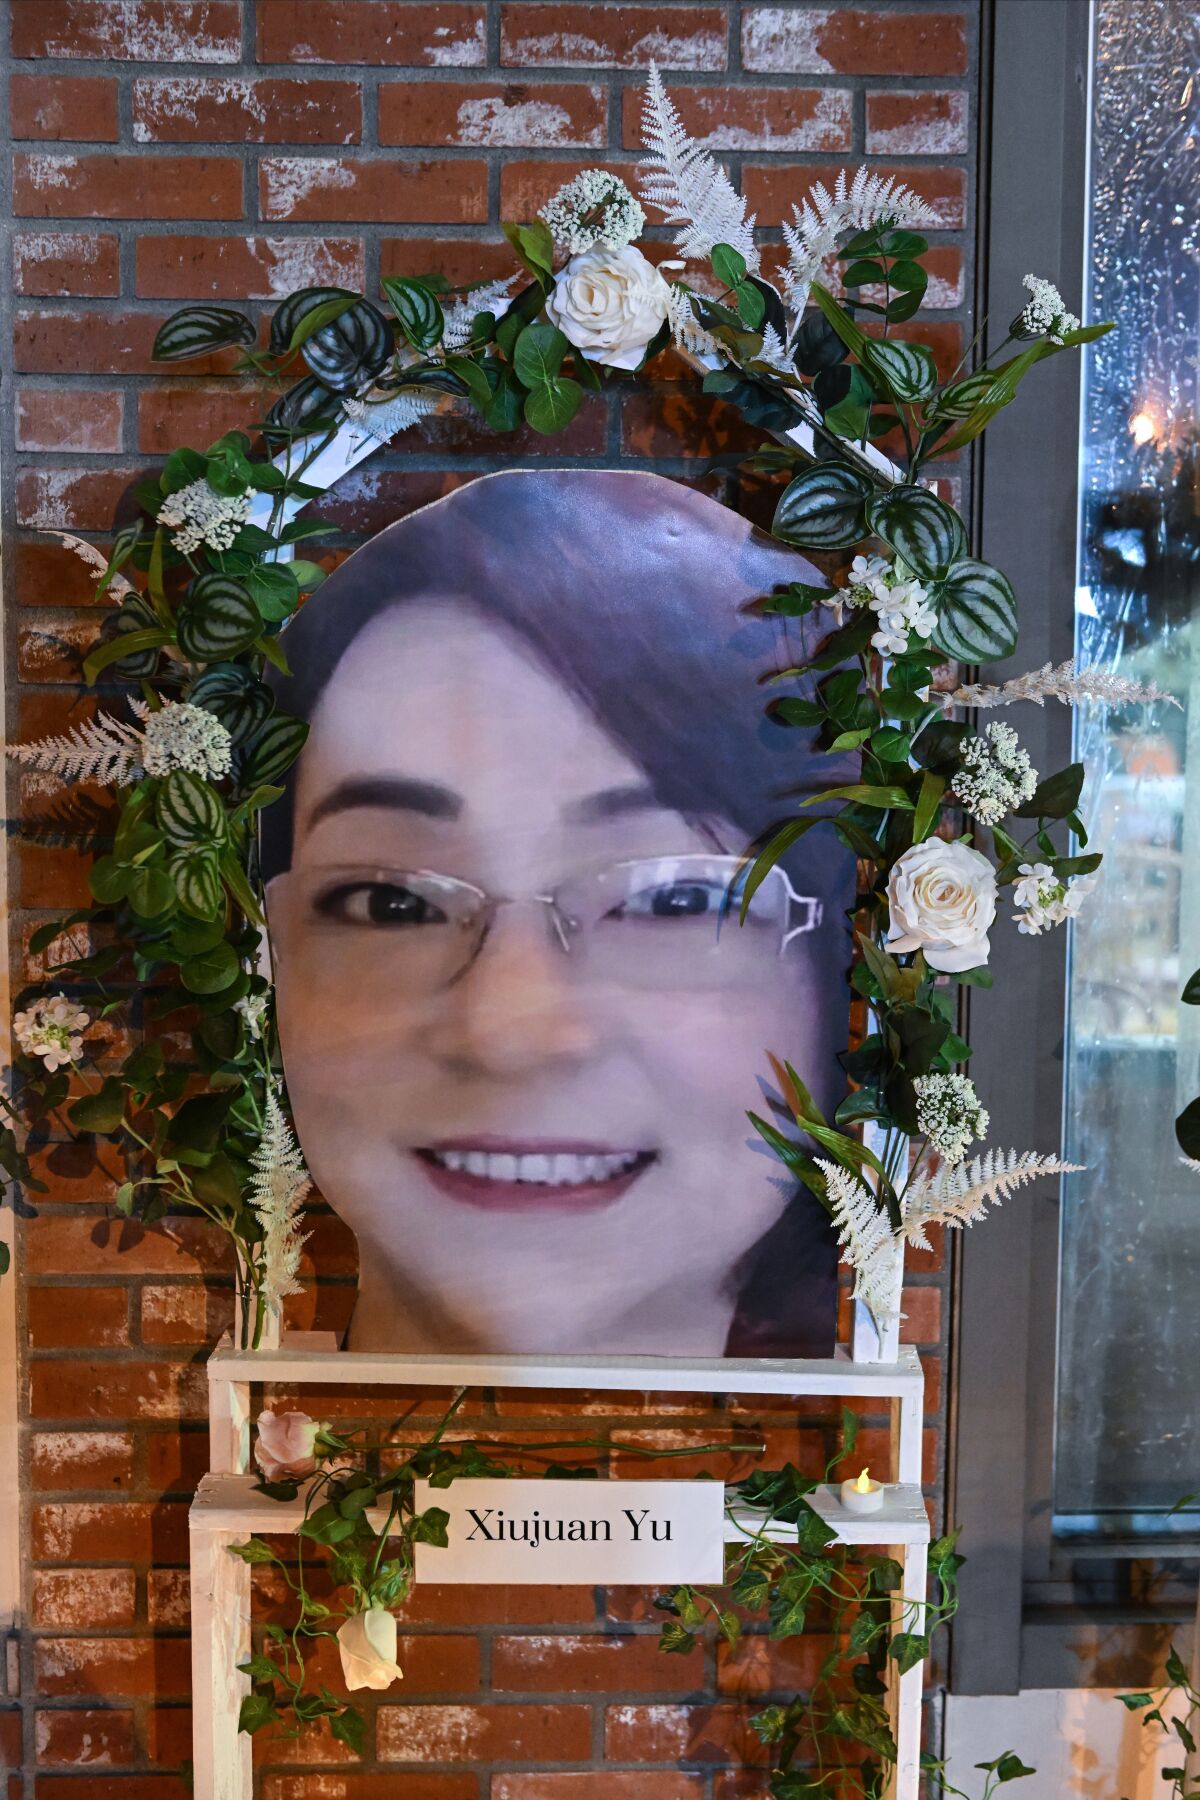 A portrait of Xiujuan Yu sits on display in front of the dance studio.